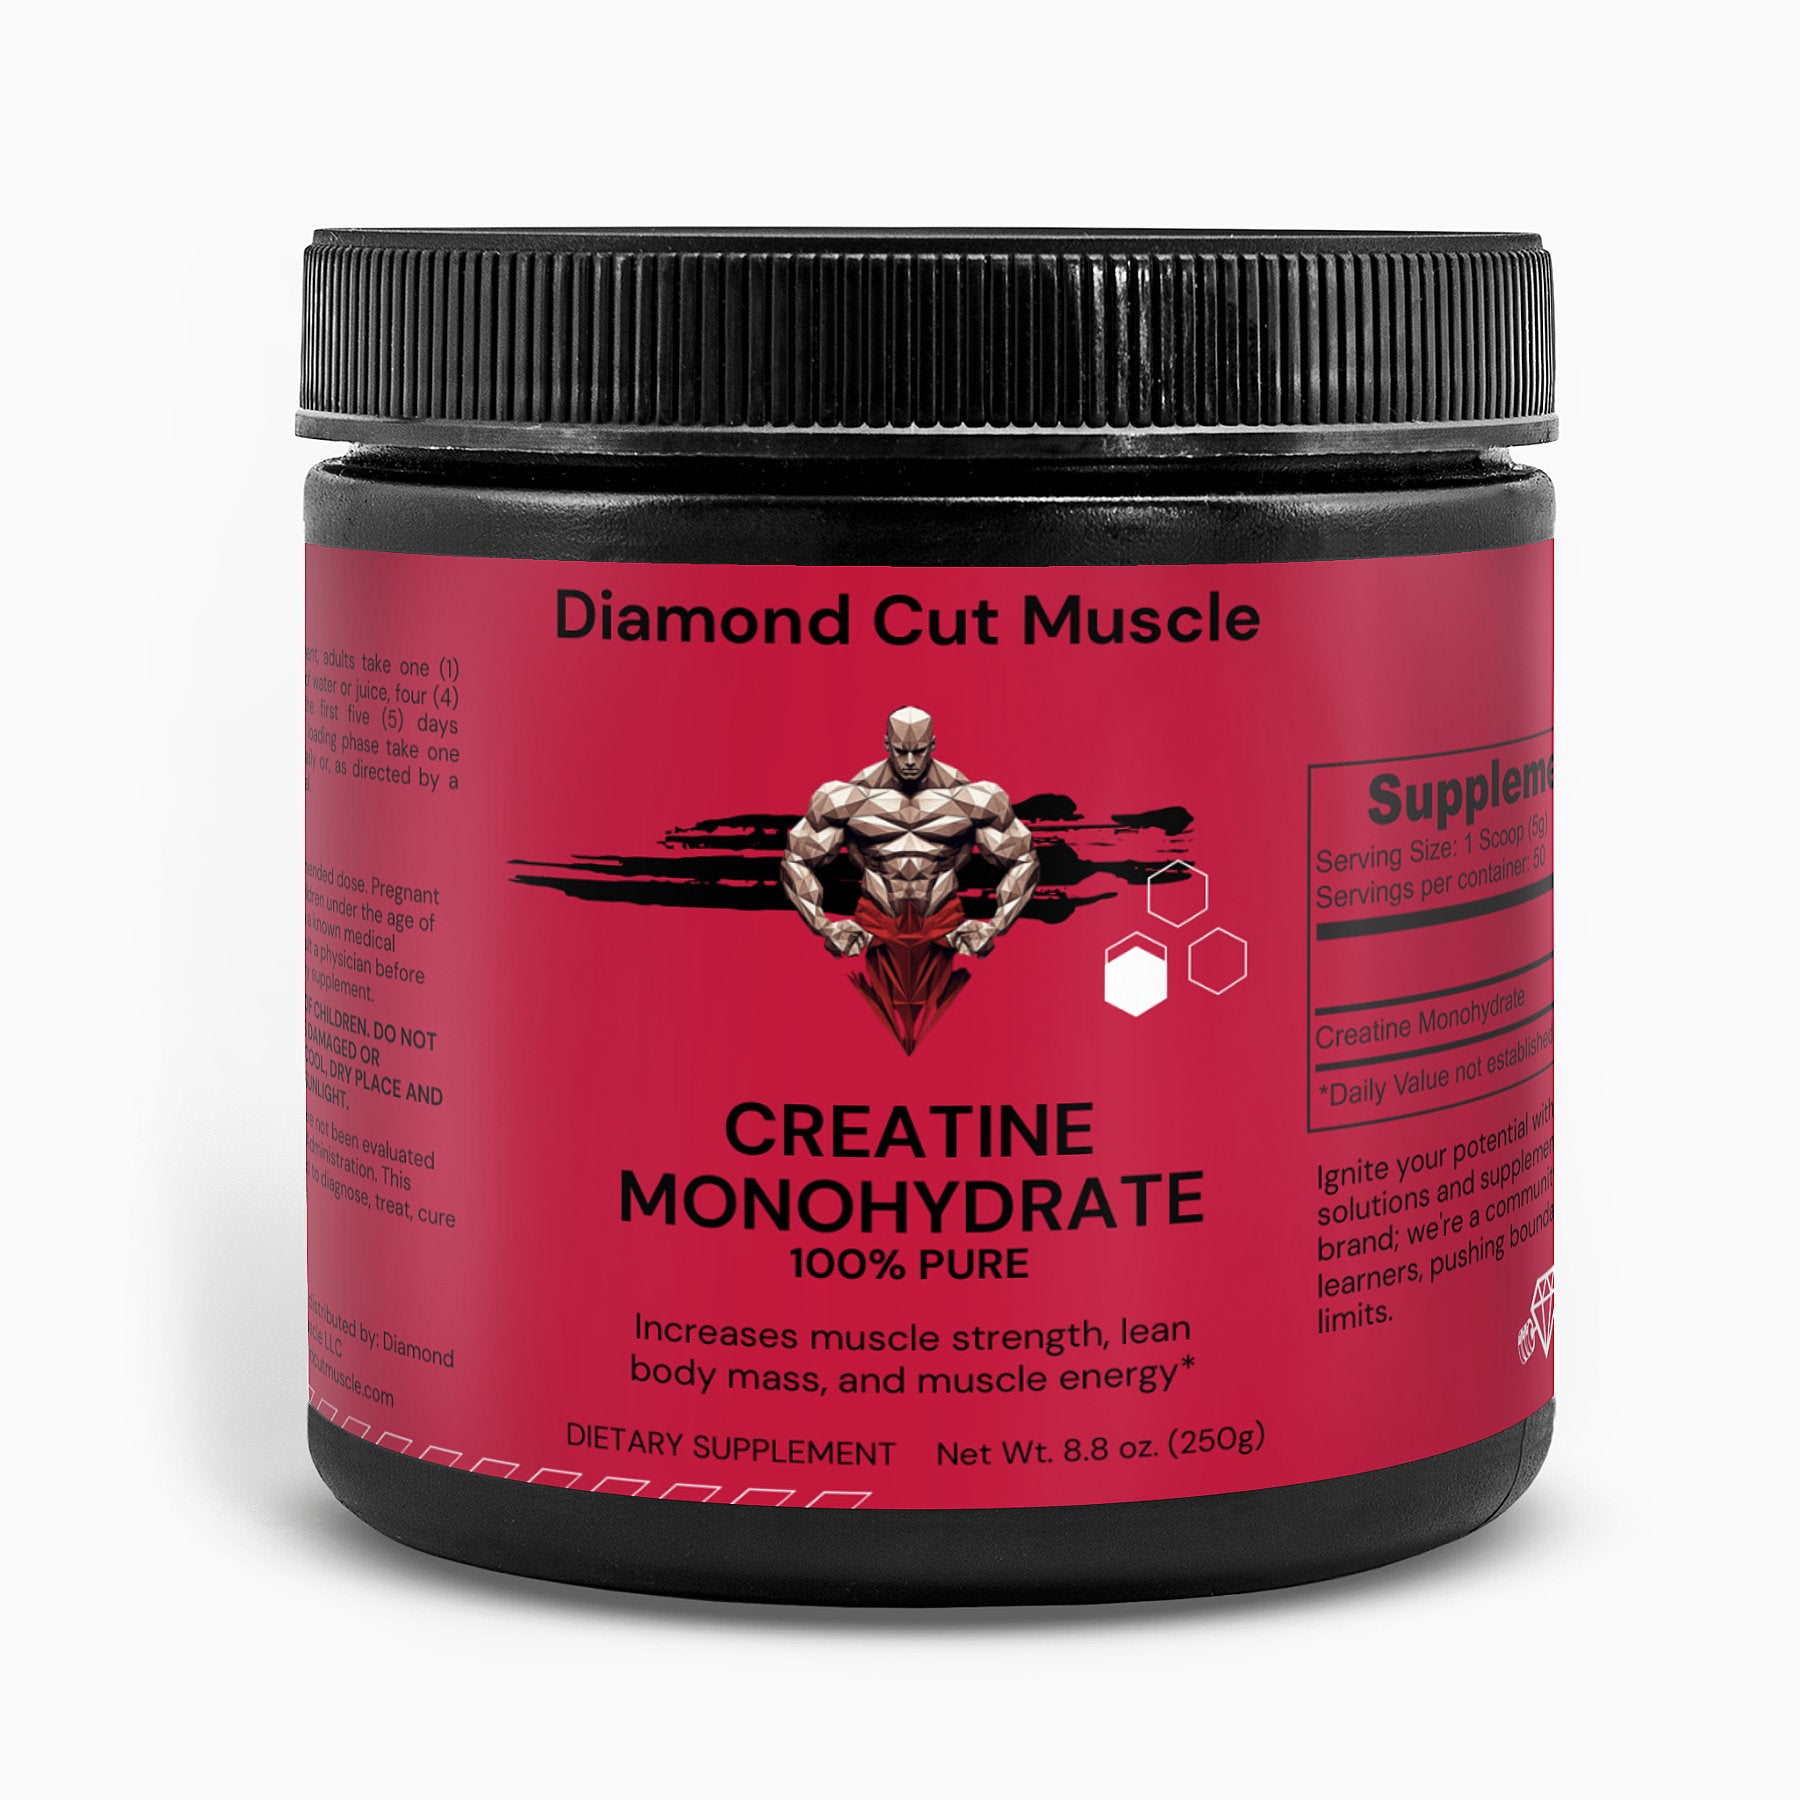 Diamond Cut Muscle Creatine Monohydrate | Unleash Your Inner Power and Confidence